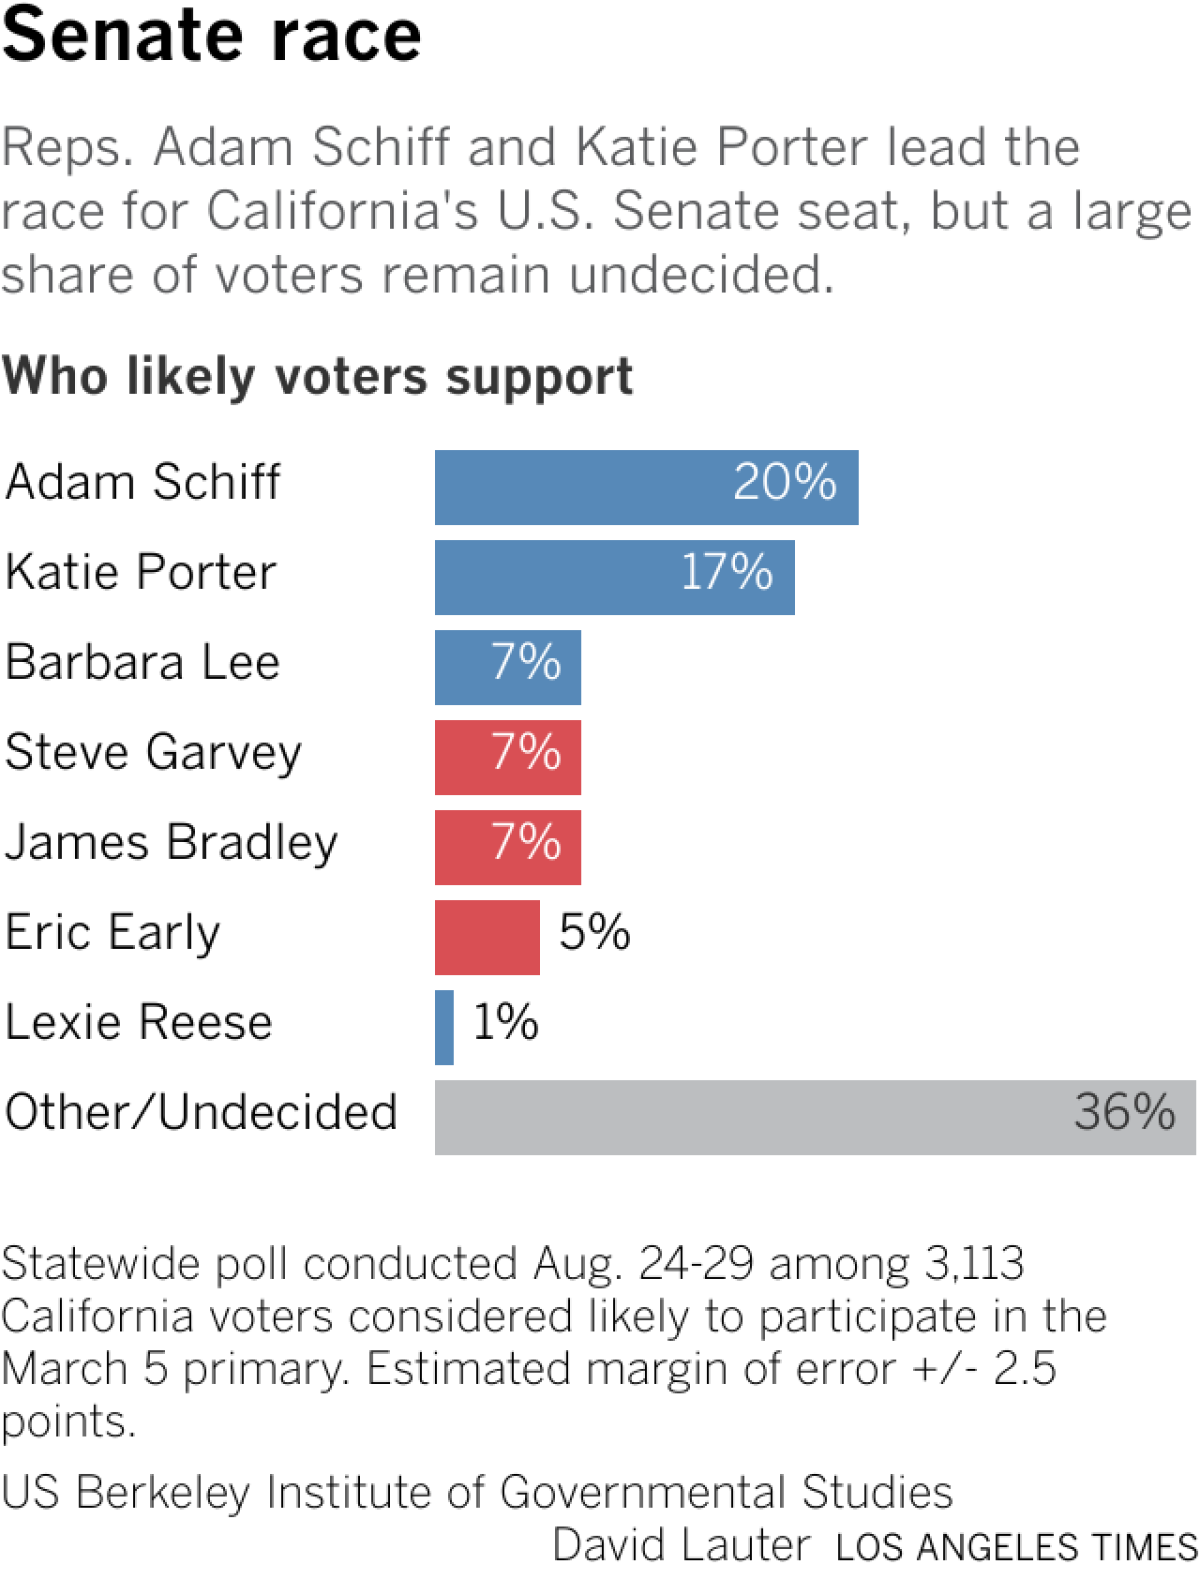 Reps. Adam Schiff and Katie Porter lead the race for California's U.S. Senate seat, but a large share of voters remain undecided.